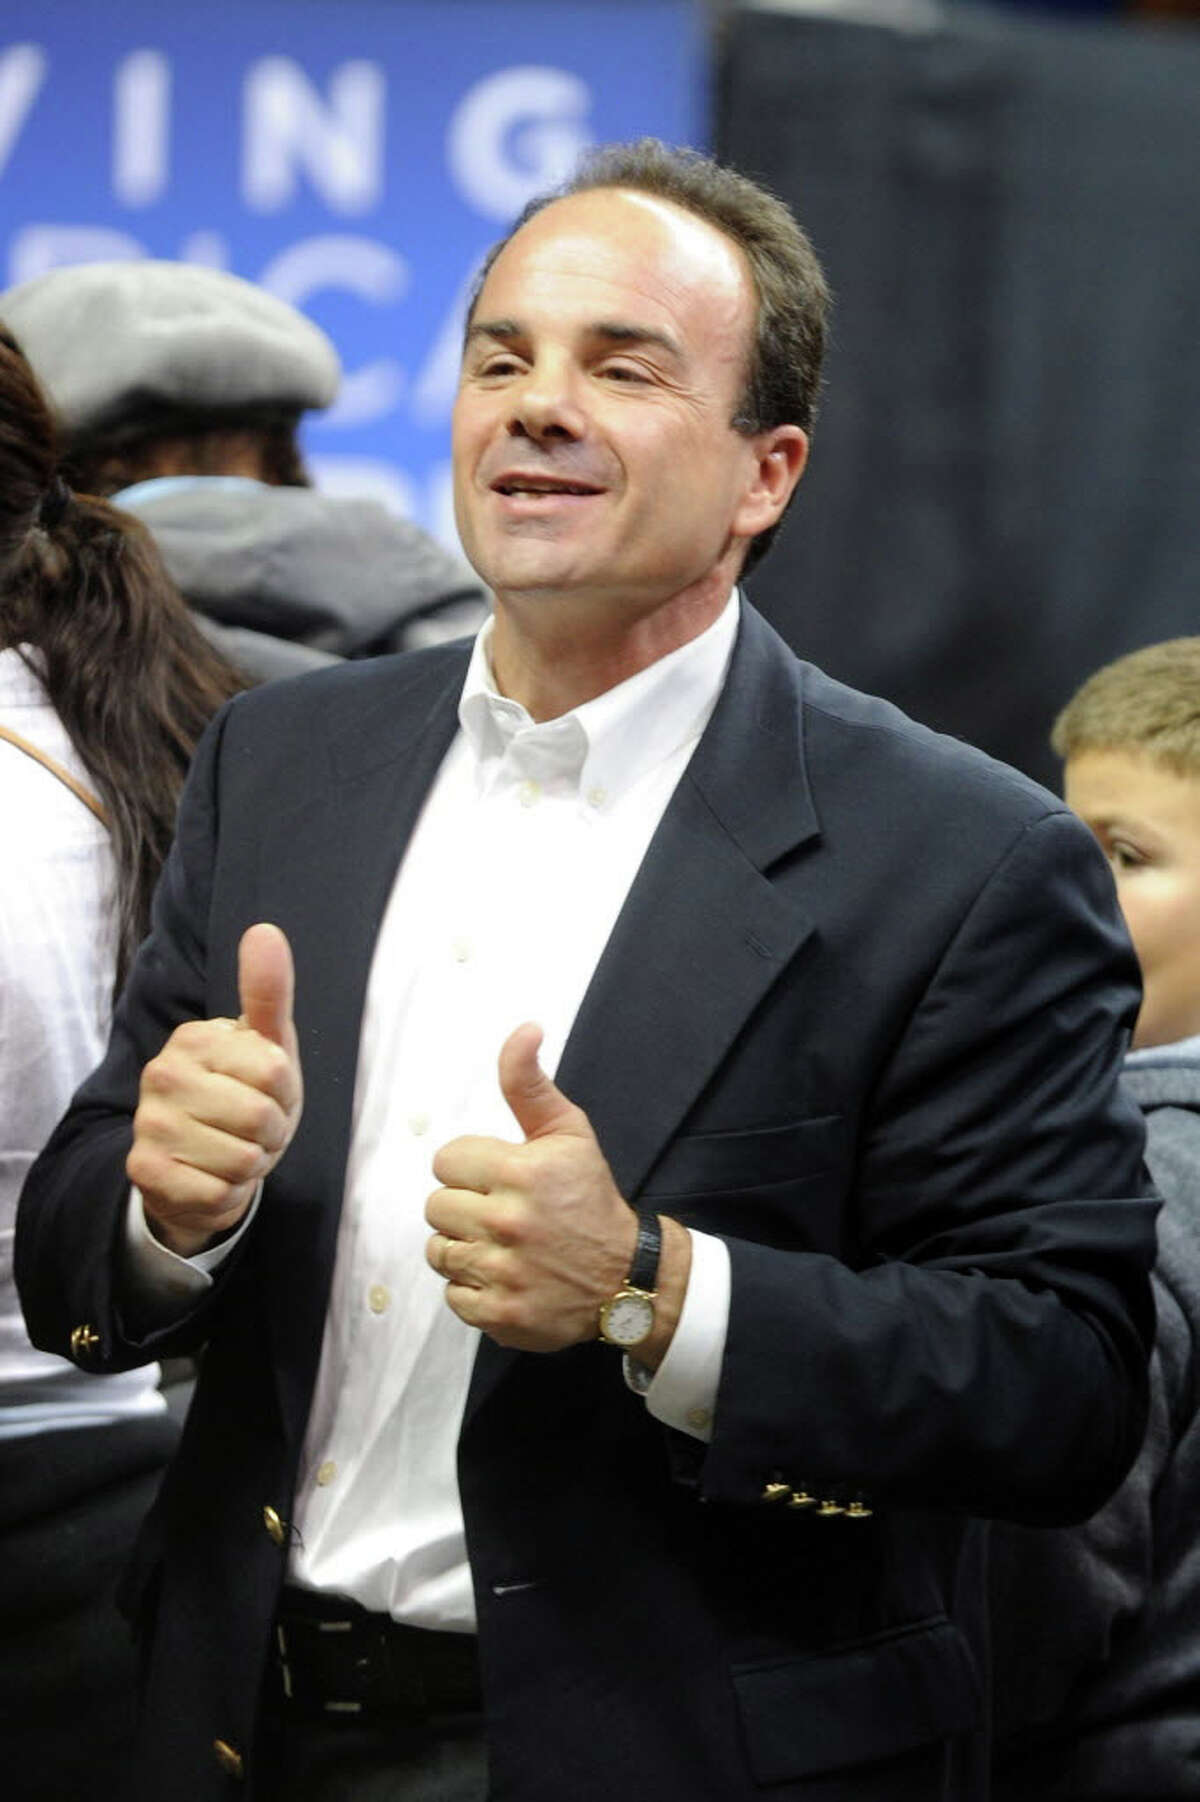 Former Bridgeport Mayor Joe Ganim in the crowd waiting for the start of the President Barack Obama rally at the Arena at Harbor Yard in Bridgeport, Conn. Saturday, Oct. 30, 2010. Ganim has paid the remainder of the fine he was assessed when convicted on 16 federal fraud accounts and is considering another run for mayor.